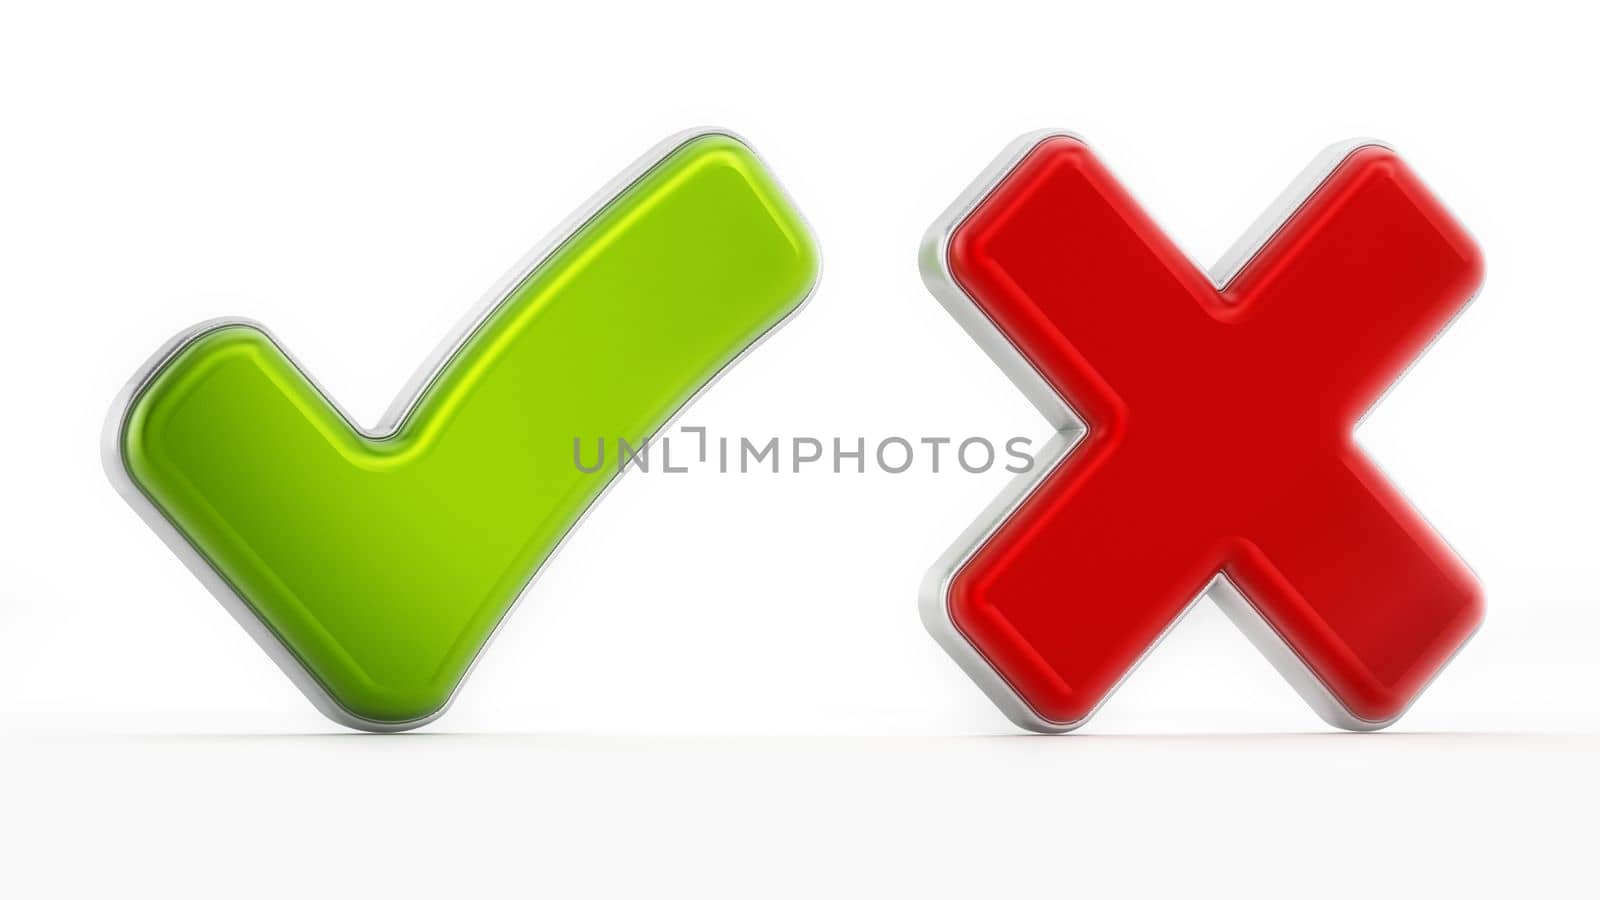 Tick and cross symbols isolated on white background. 3D illustration by Simsek